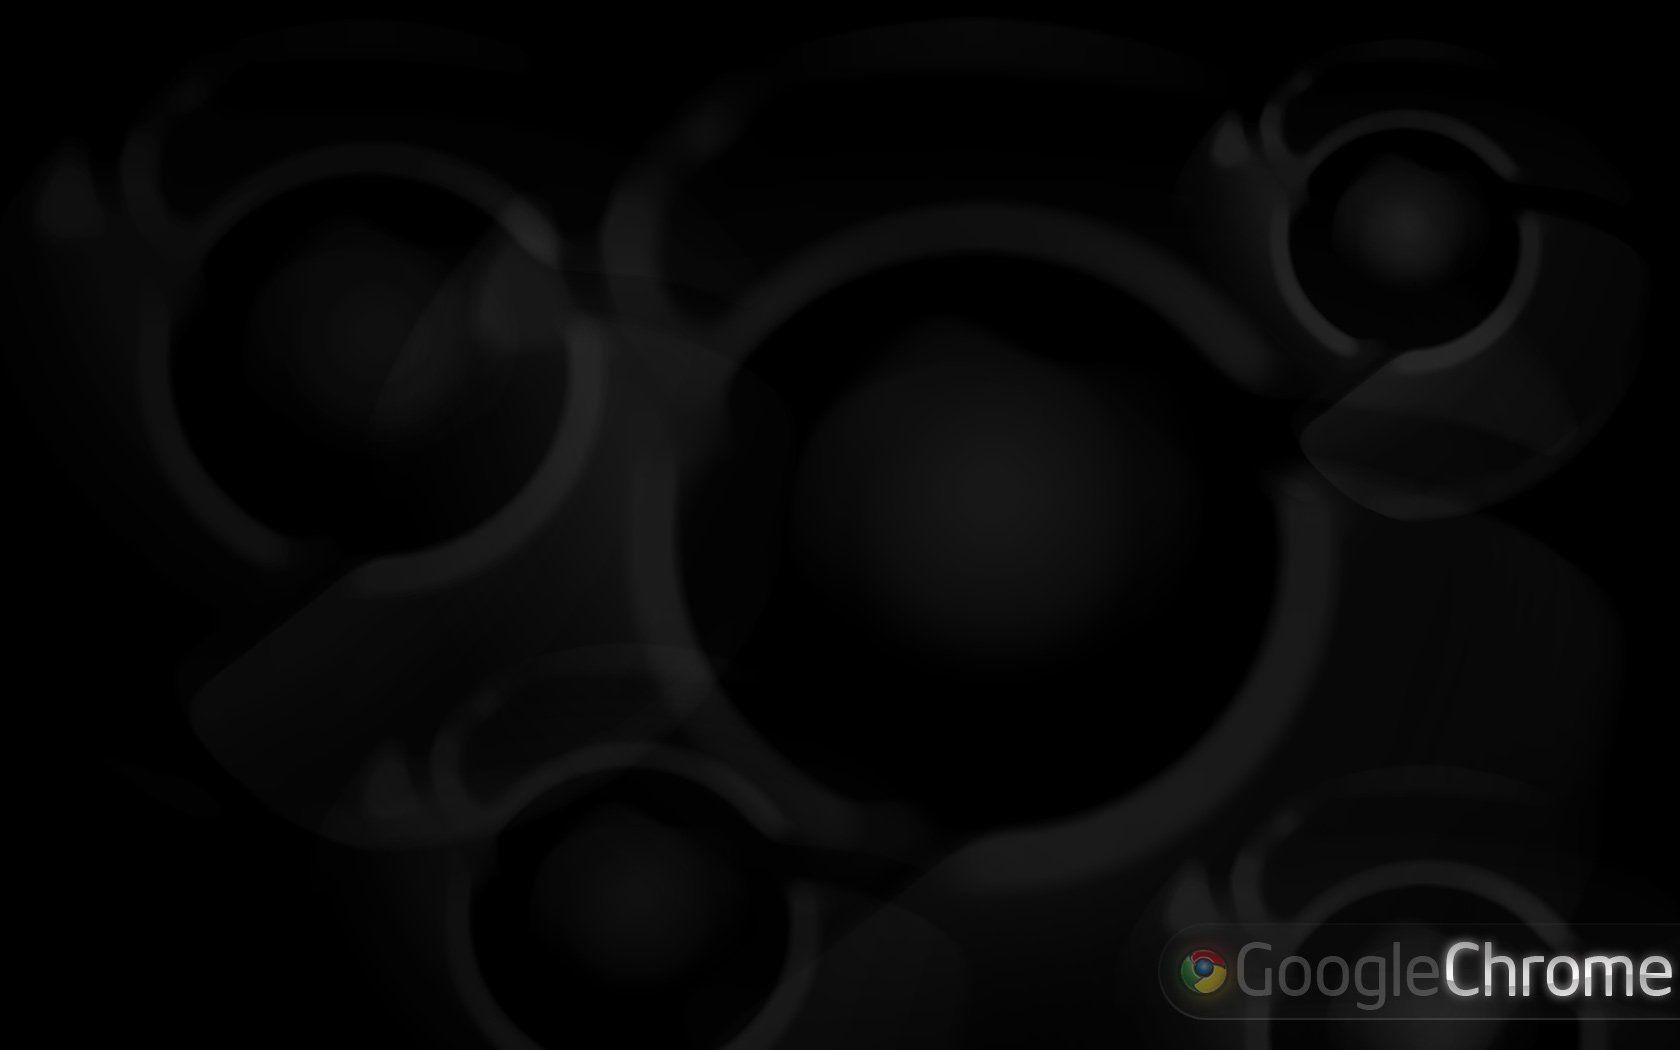 Google Chrome Wallpaper and Background Imagex1050